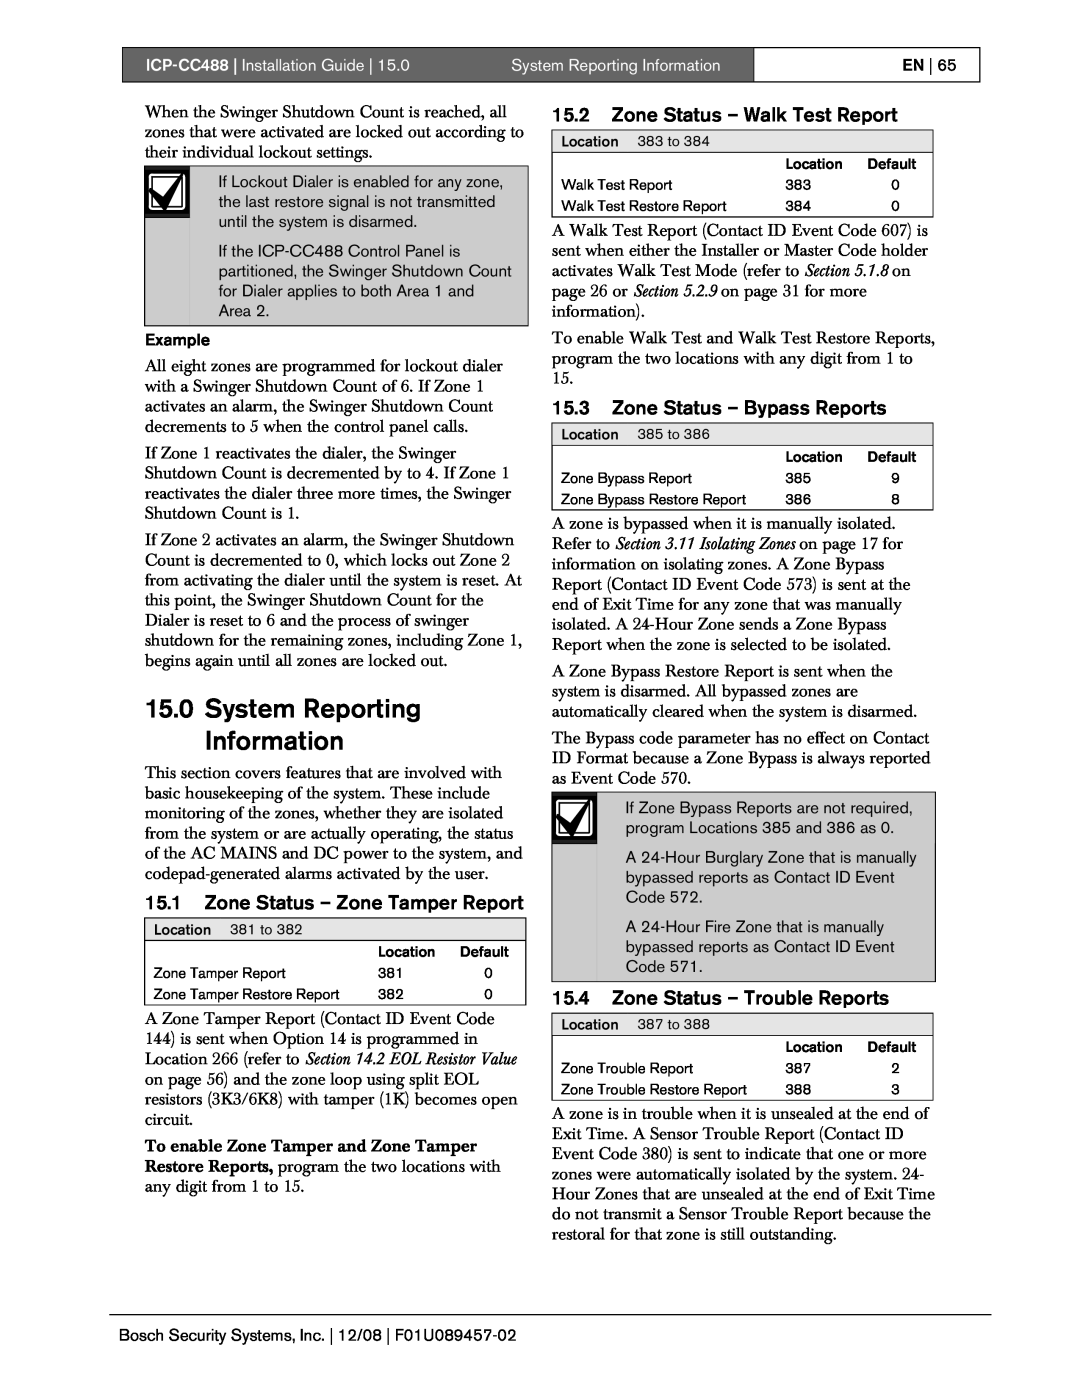 Bosch Appliances ICP-CC488 manual System Reporting Information, 15.1Zone Status – Zone Tamper Report 